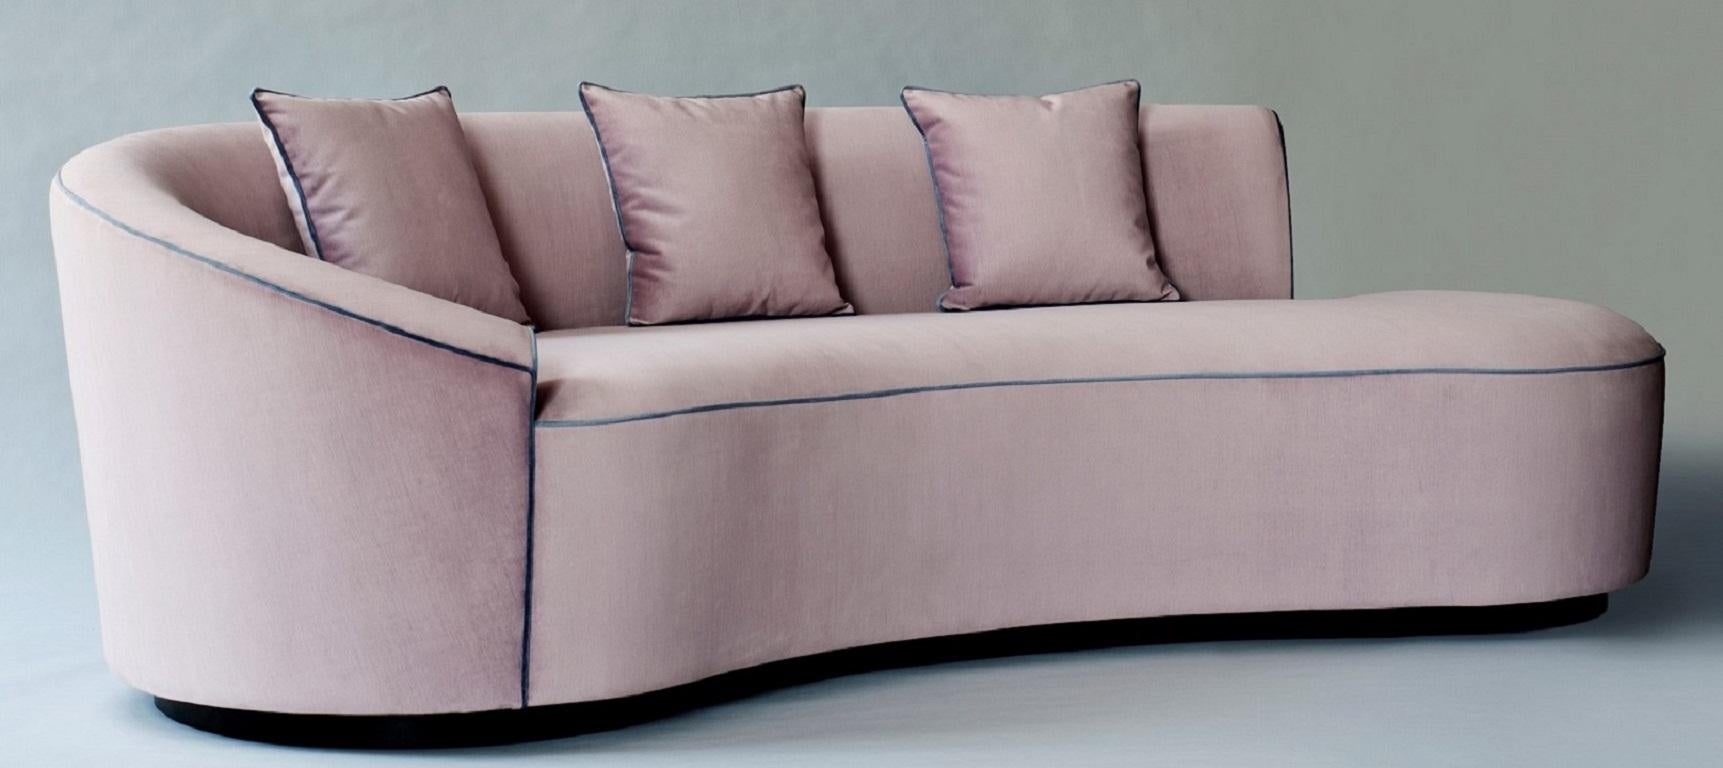 A discreet oak base anchors the serpentine upholstery of the Astra Sofa, available with or without contrast piping. Its single arm (either left or right-facing) curves to become the low back that runs part way along the seat, elegantly cradling a